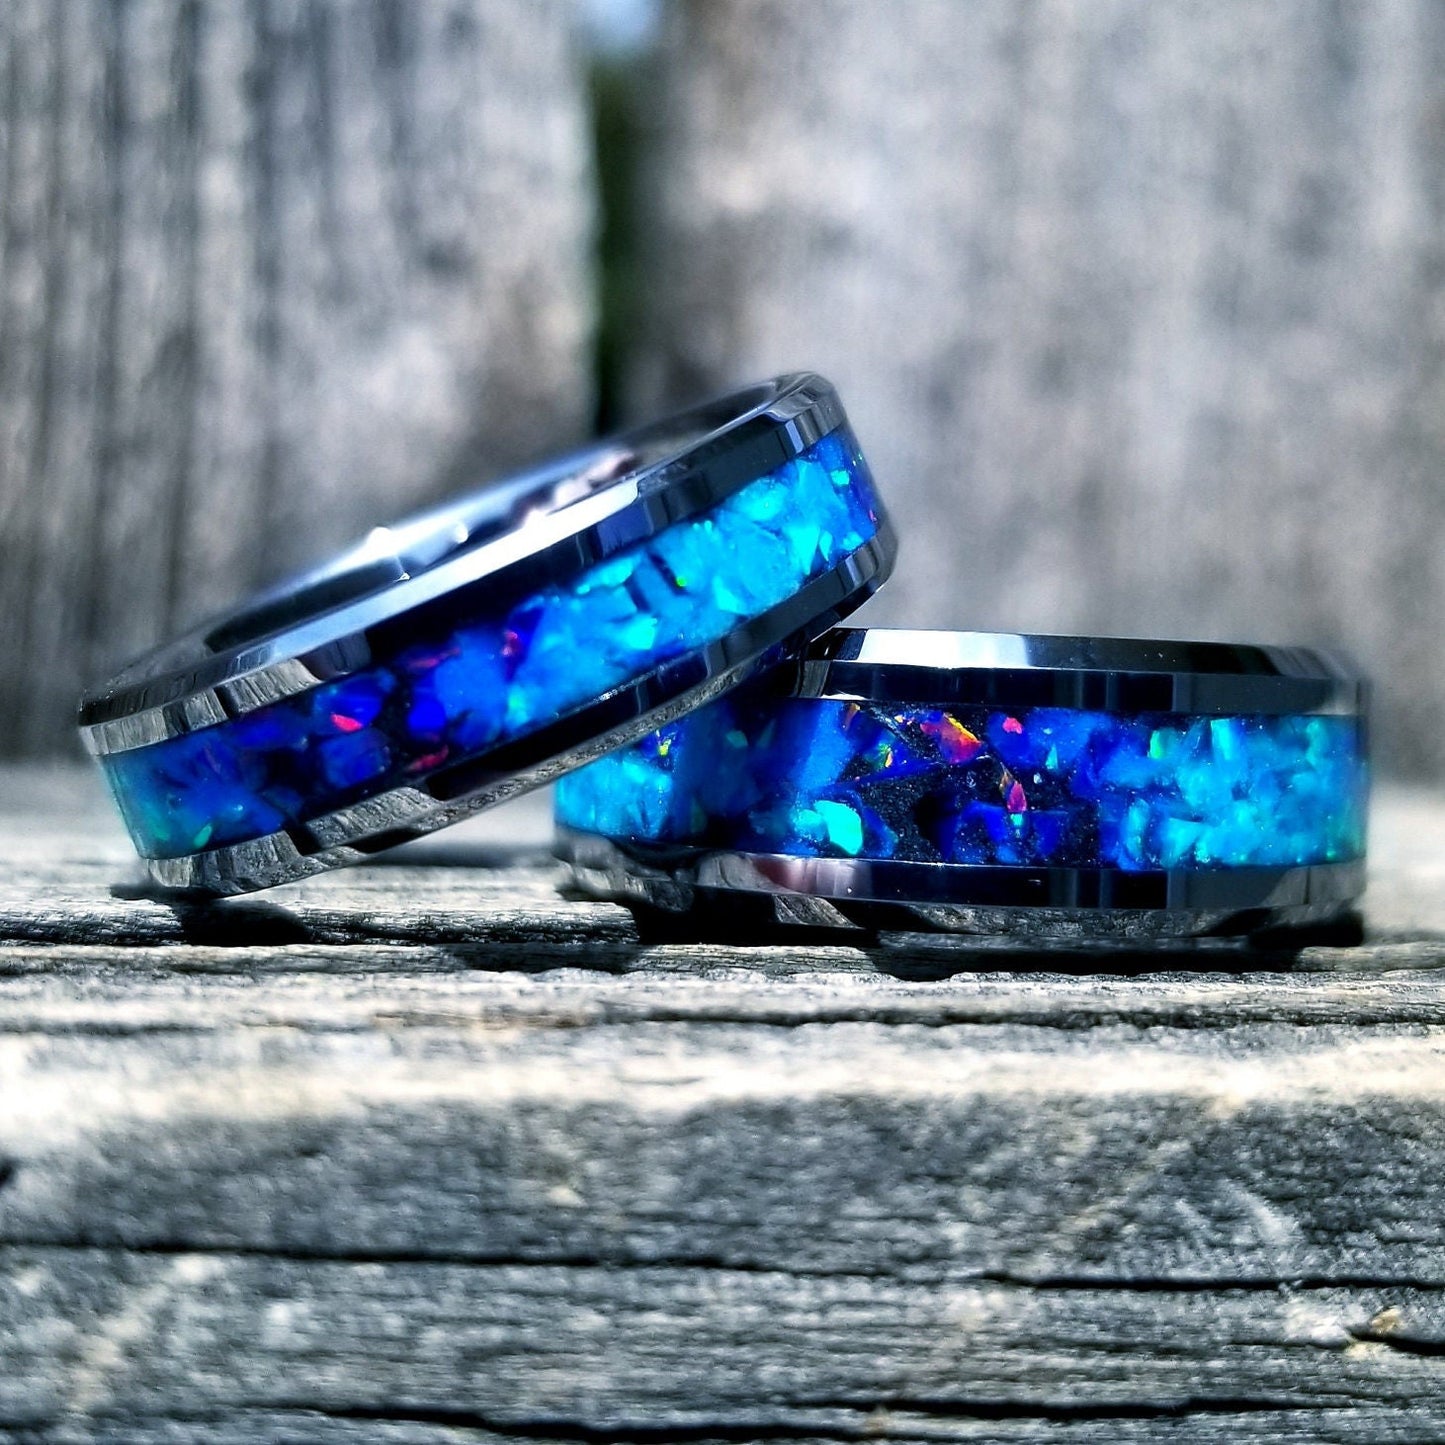 Tungsten carbide glow ring with turquoise opal and blue fire opal inlay. Men's ring. Women's ring. Wedding ring. Glow ring Sizes 5-13